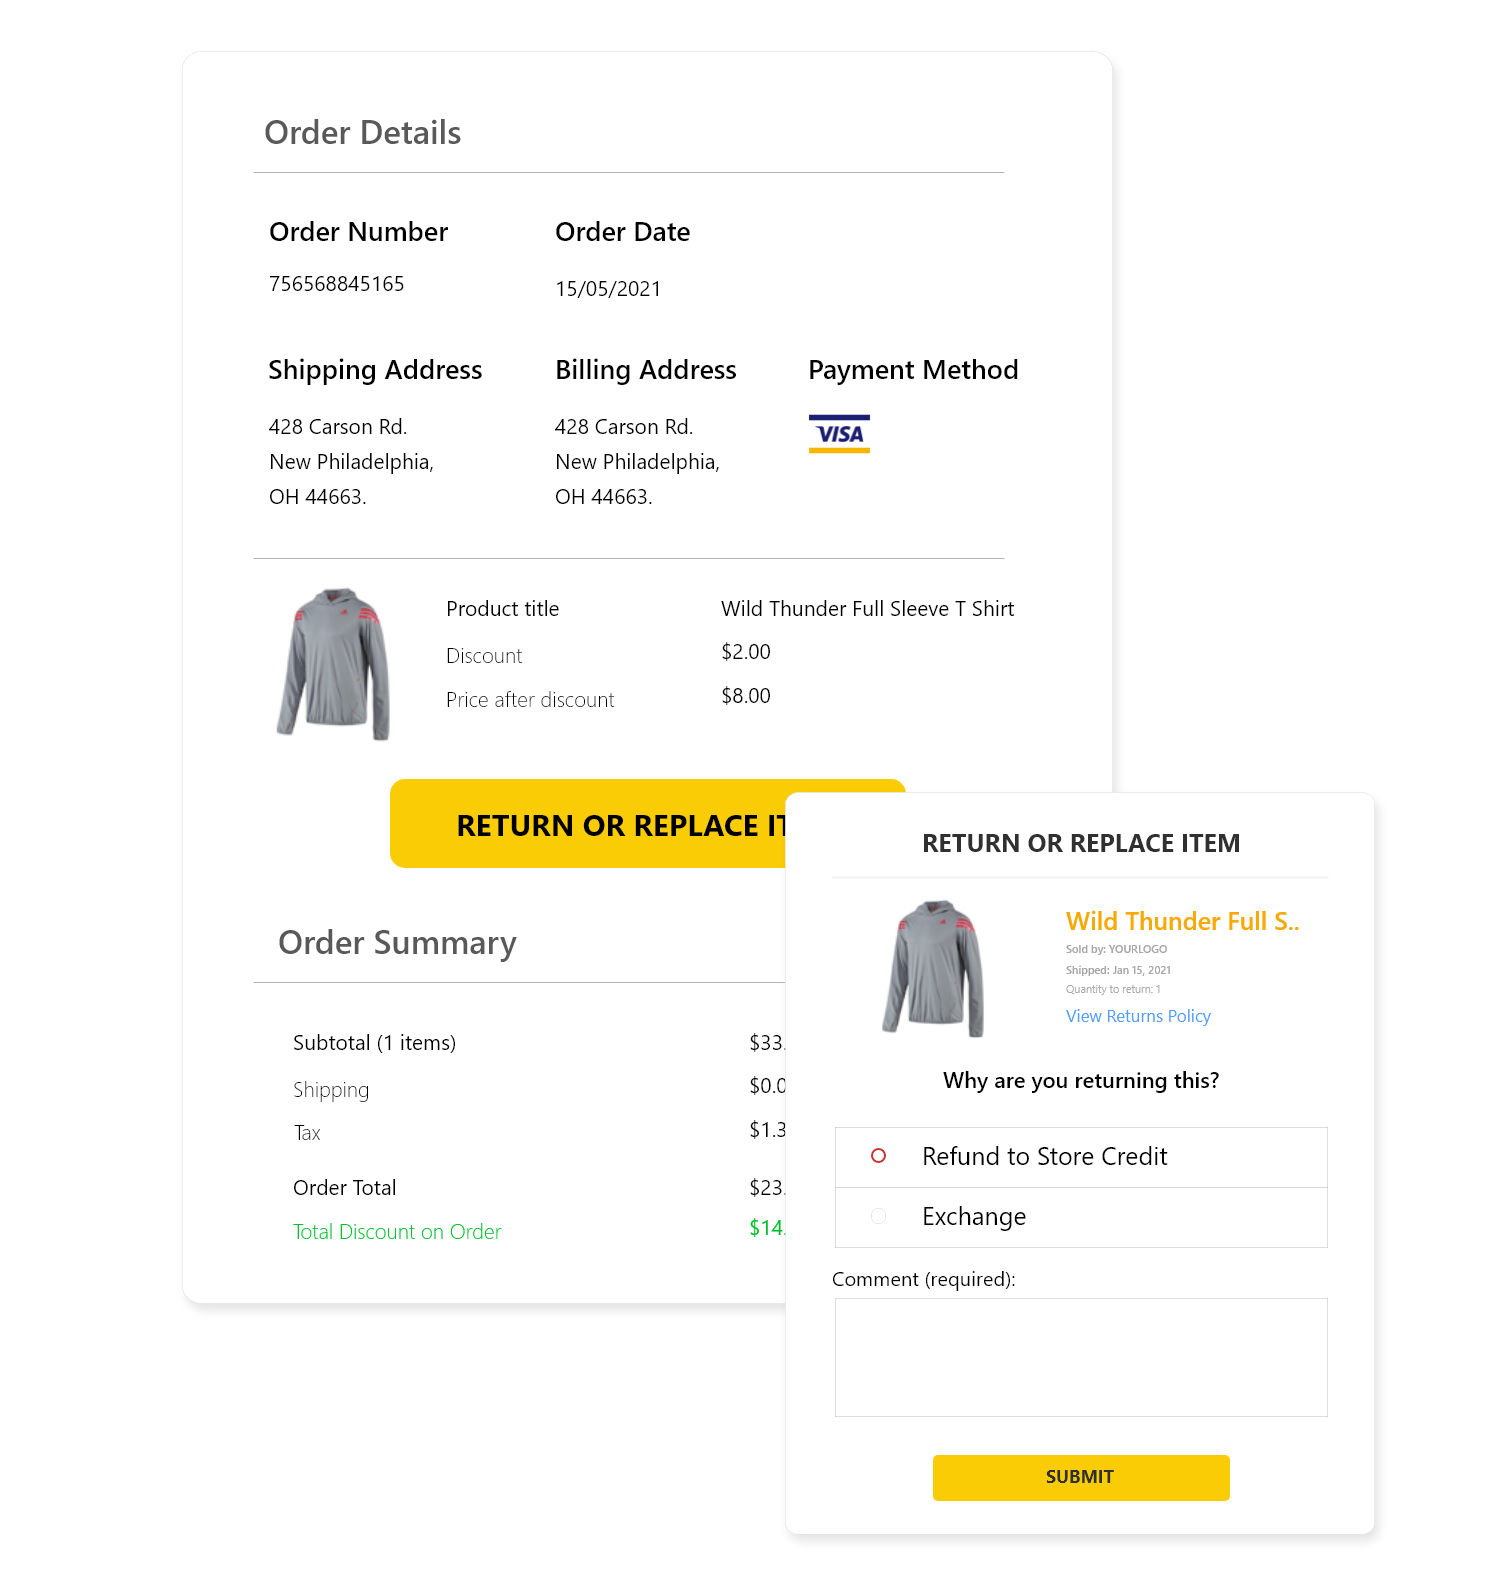 Take ownership of order-delivery updates